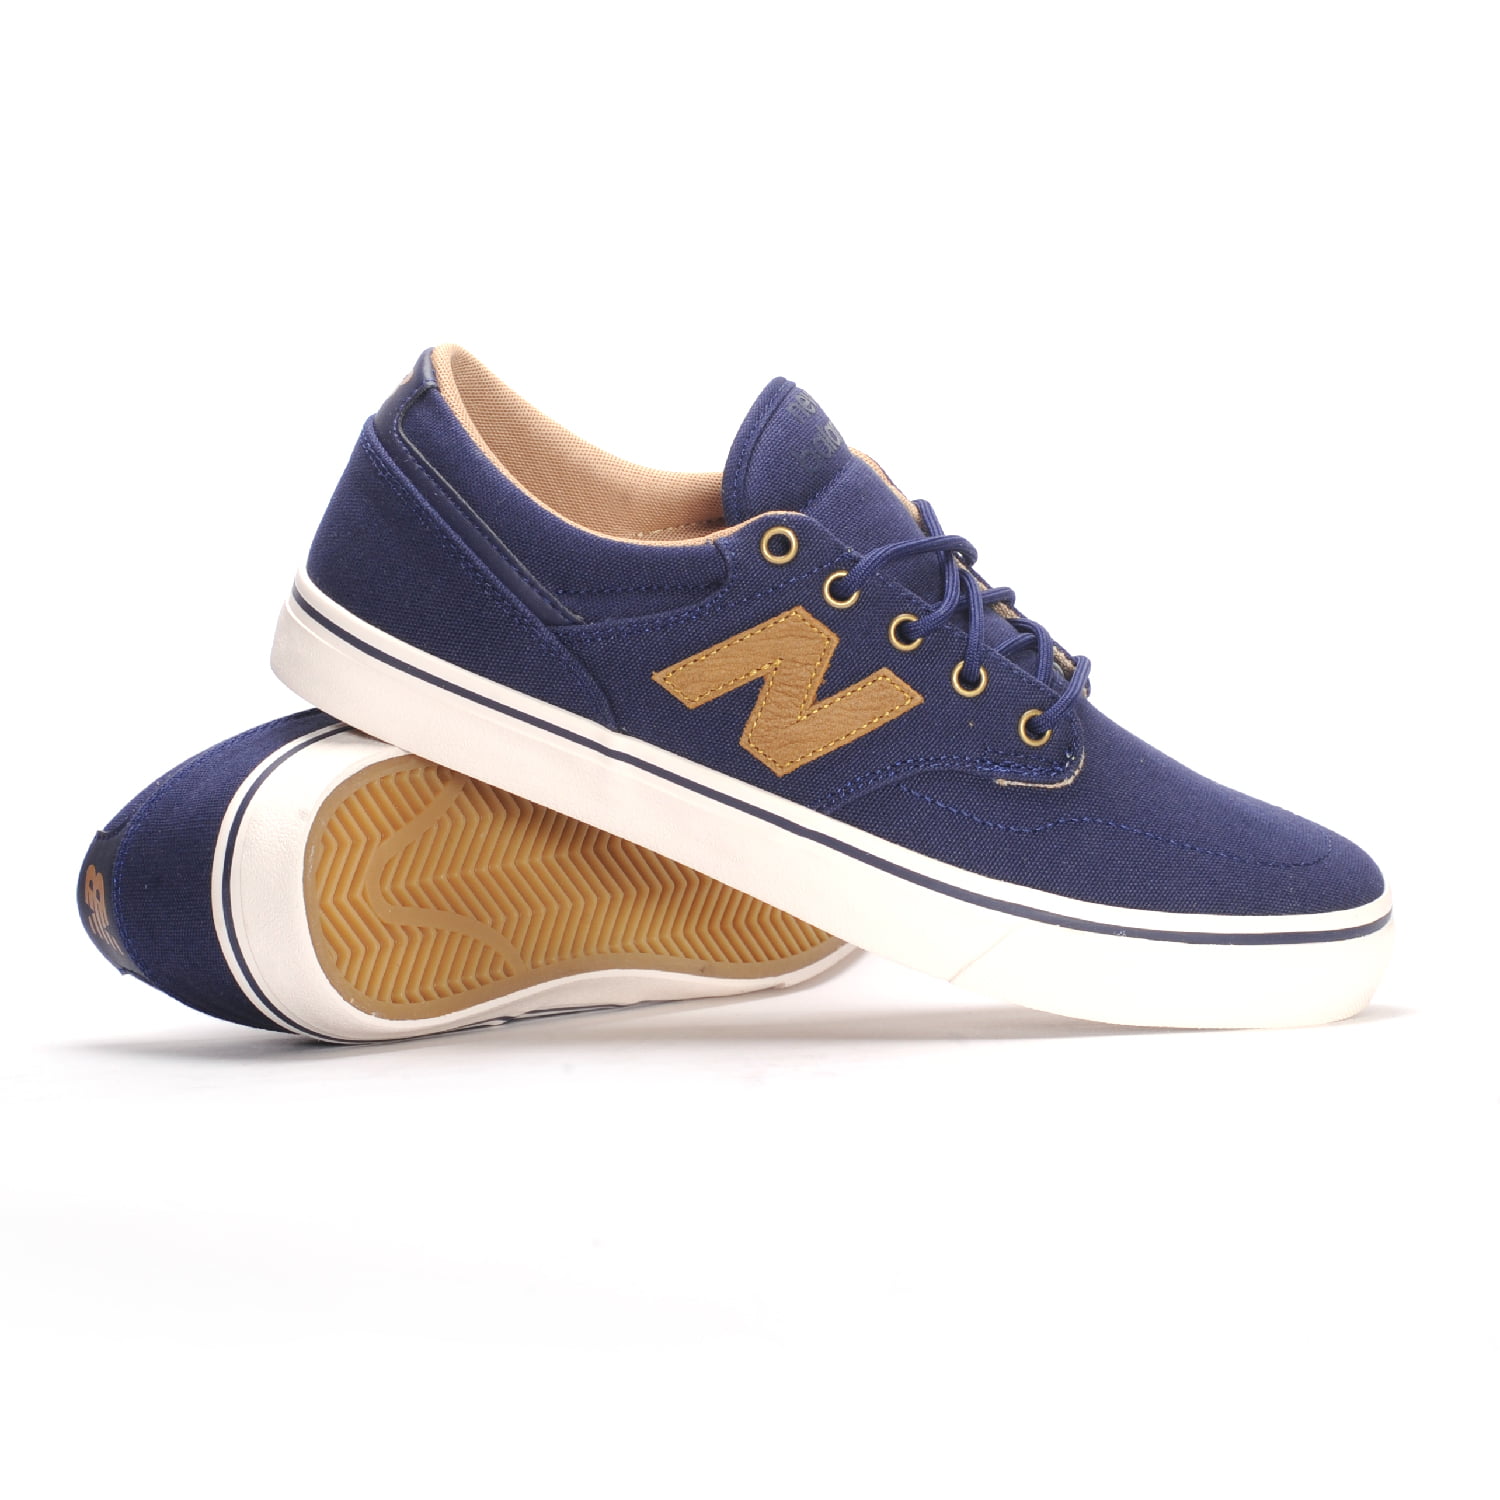 New Balance All Coasts 331 (Navy/Brown) Men's Skate Shoes-10.5